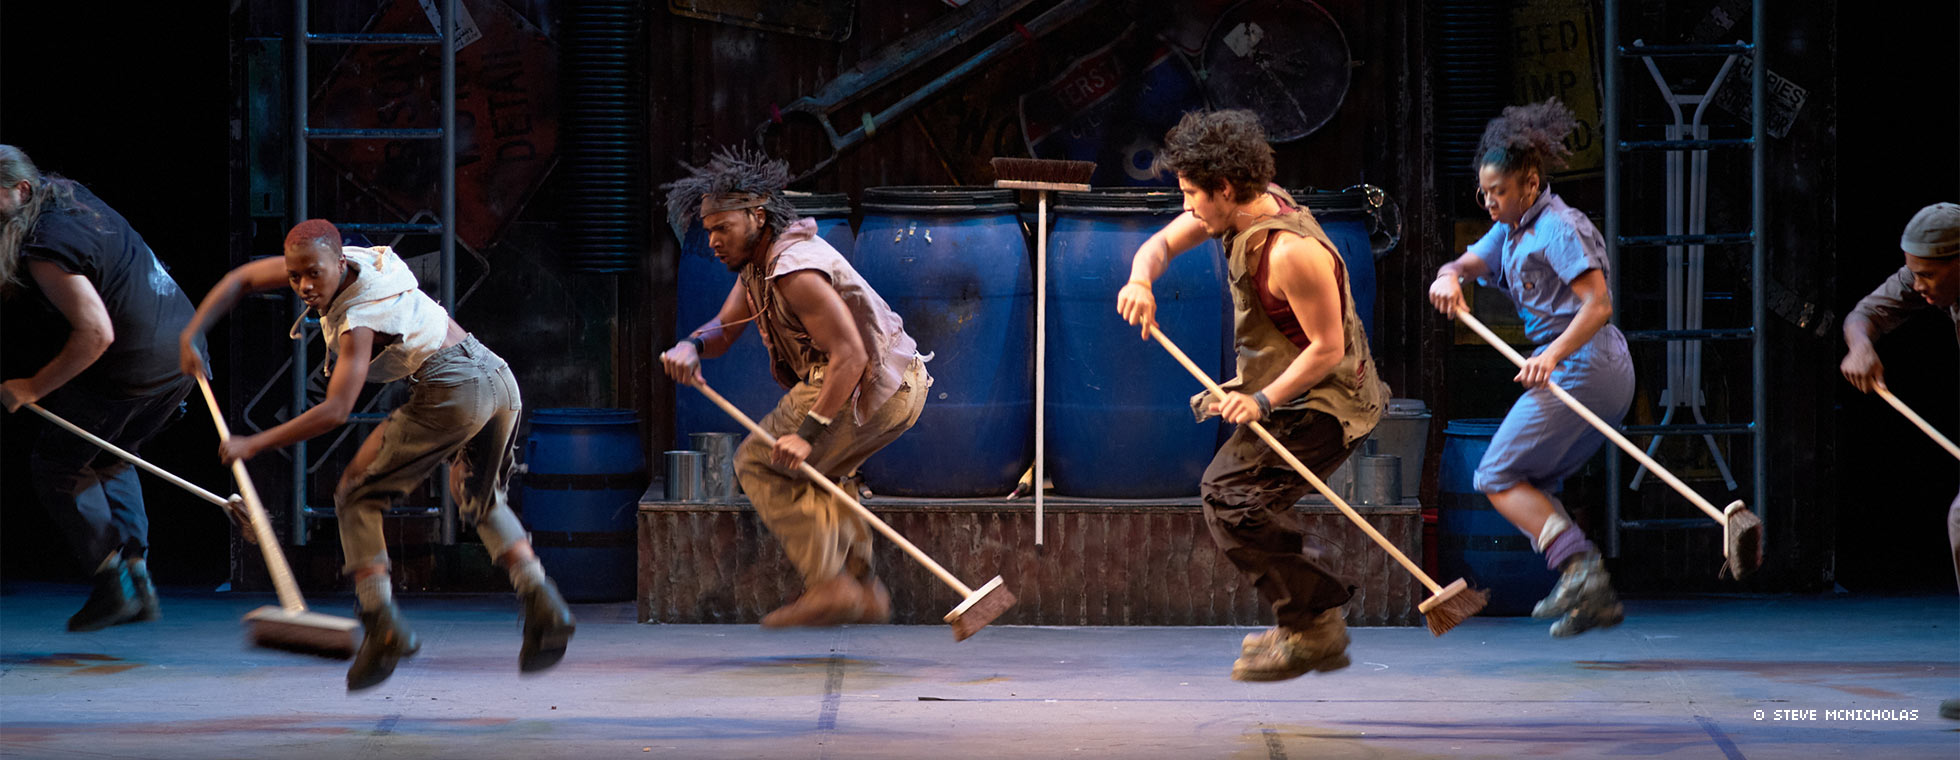 Men of color facing the same direction hold utility brooms in a sweeping motion while they jump in mid-air.